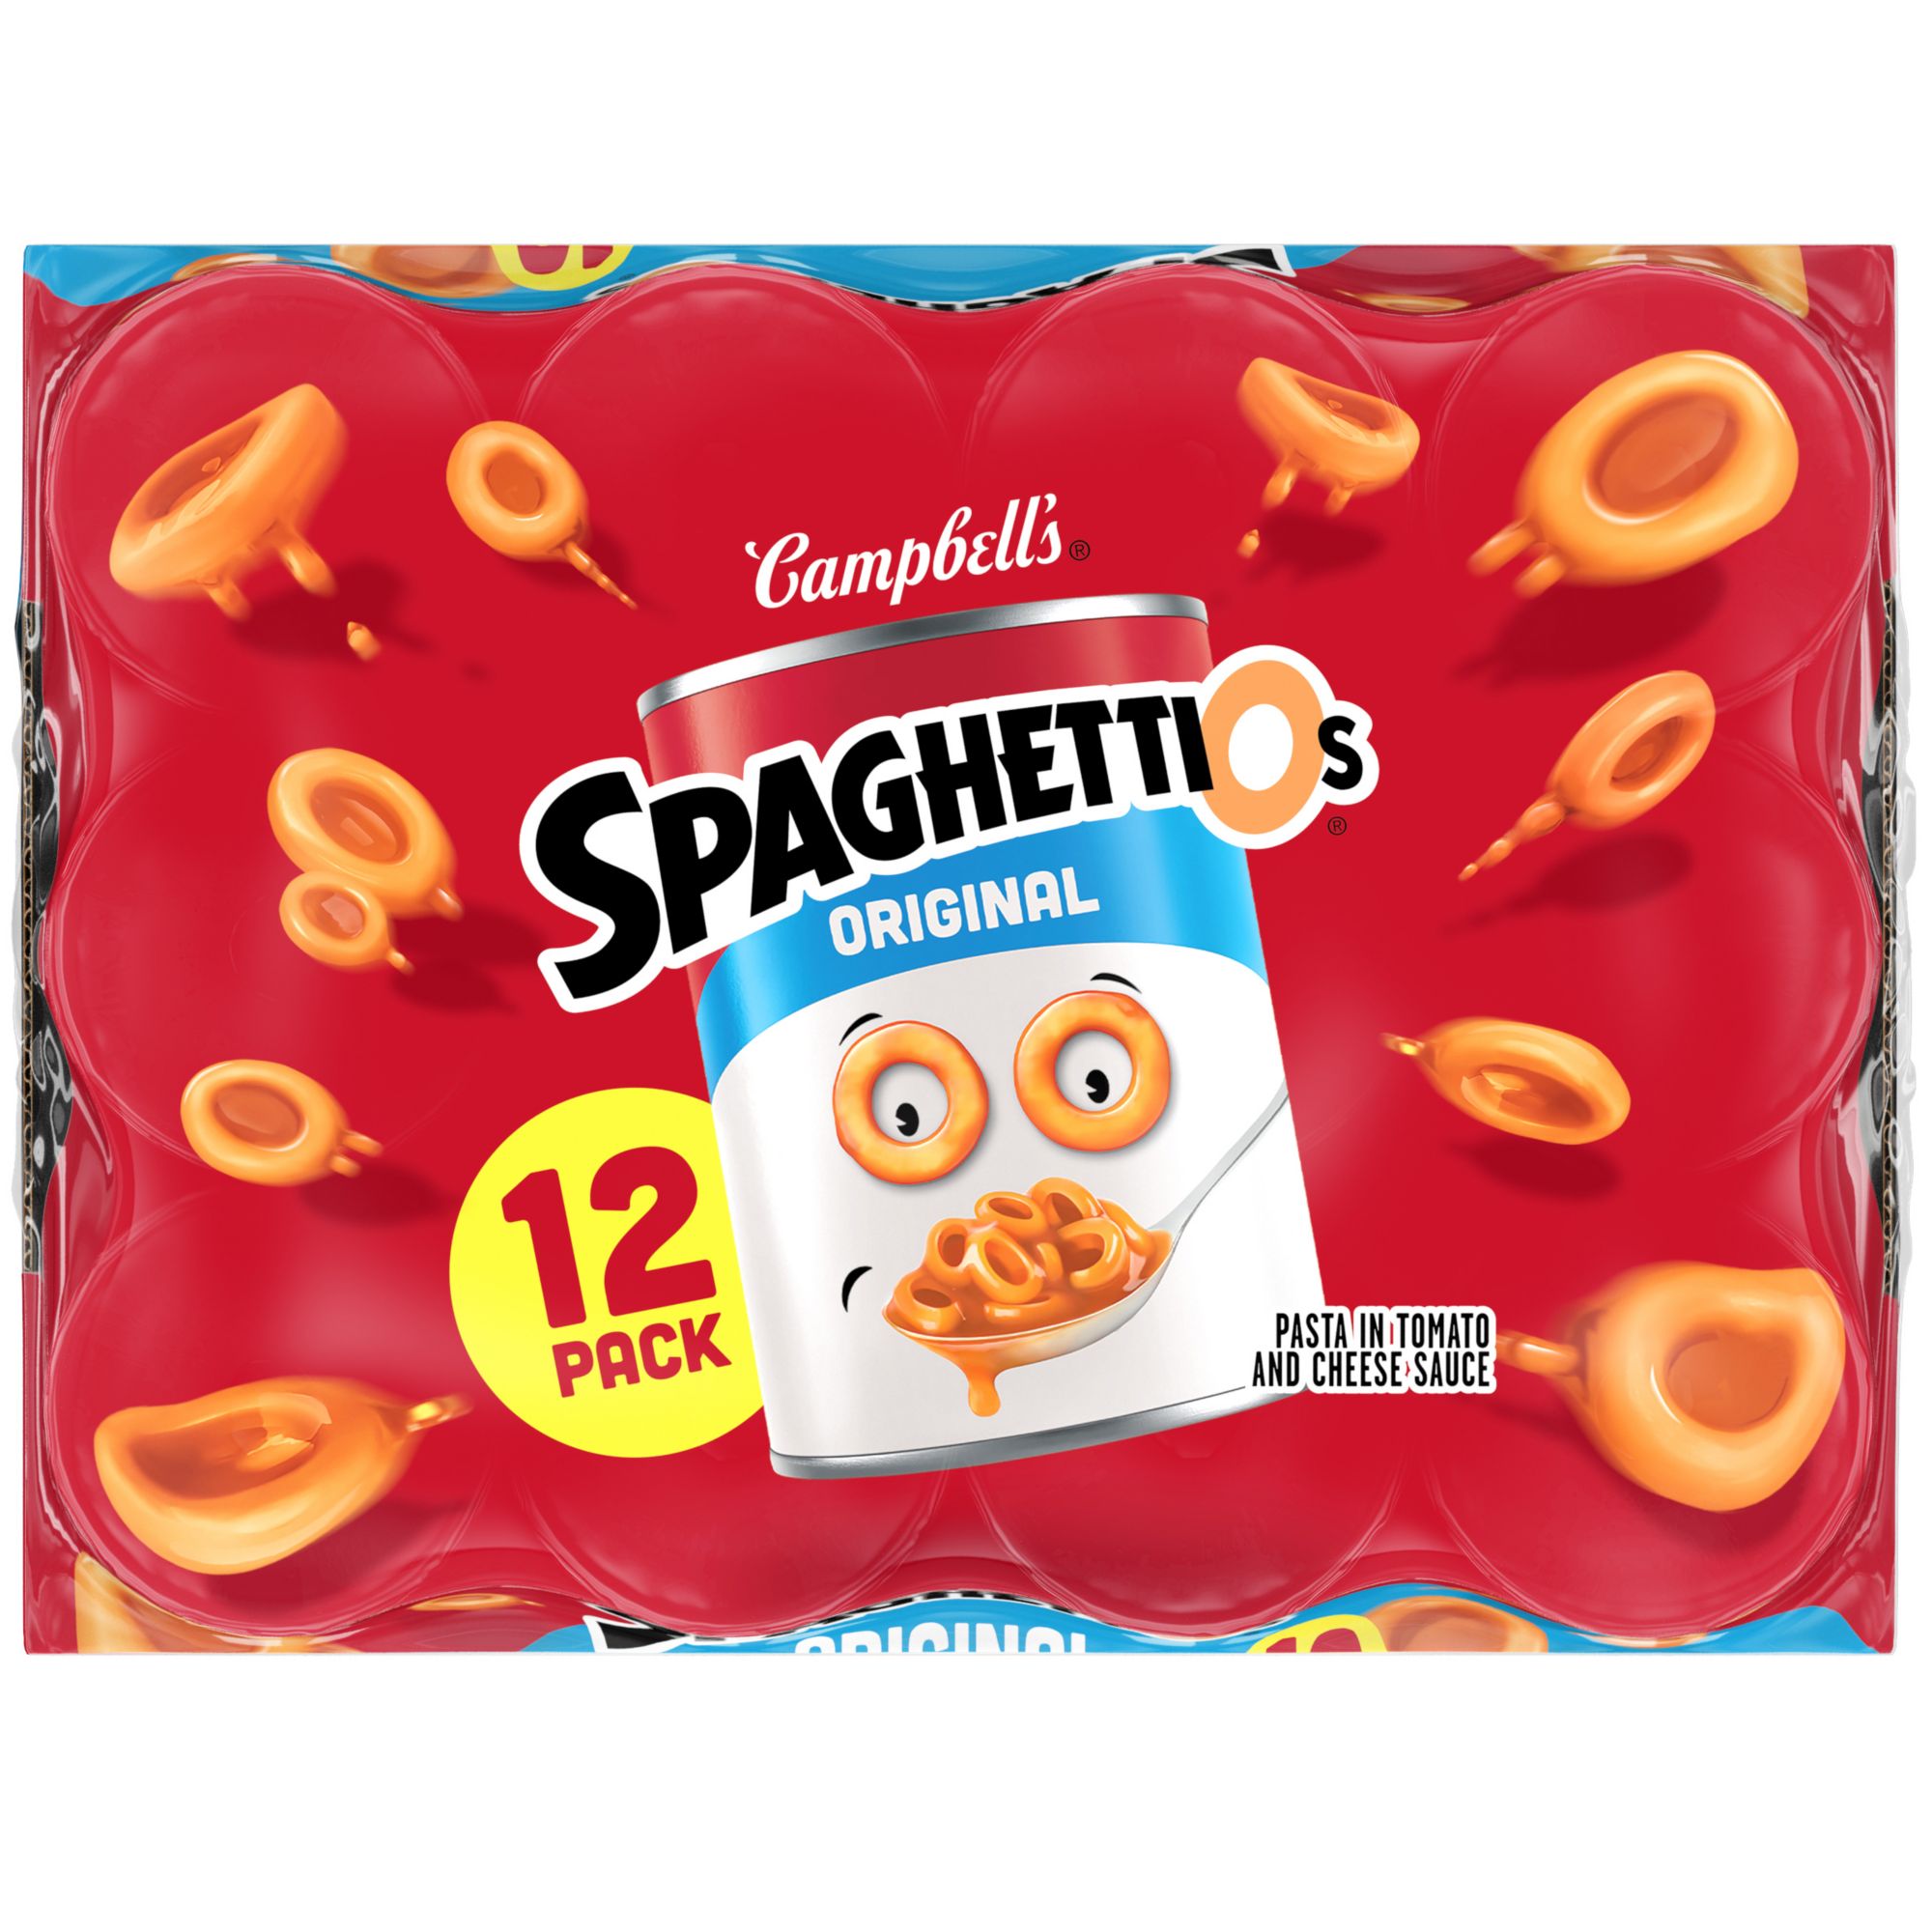 Campbell's Franks Redhot Spaghetti O's Pasta 15.8 oz ( 3 cans)